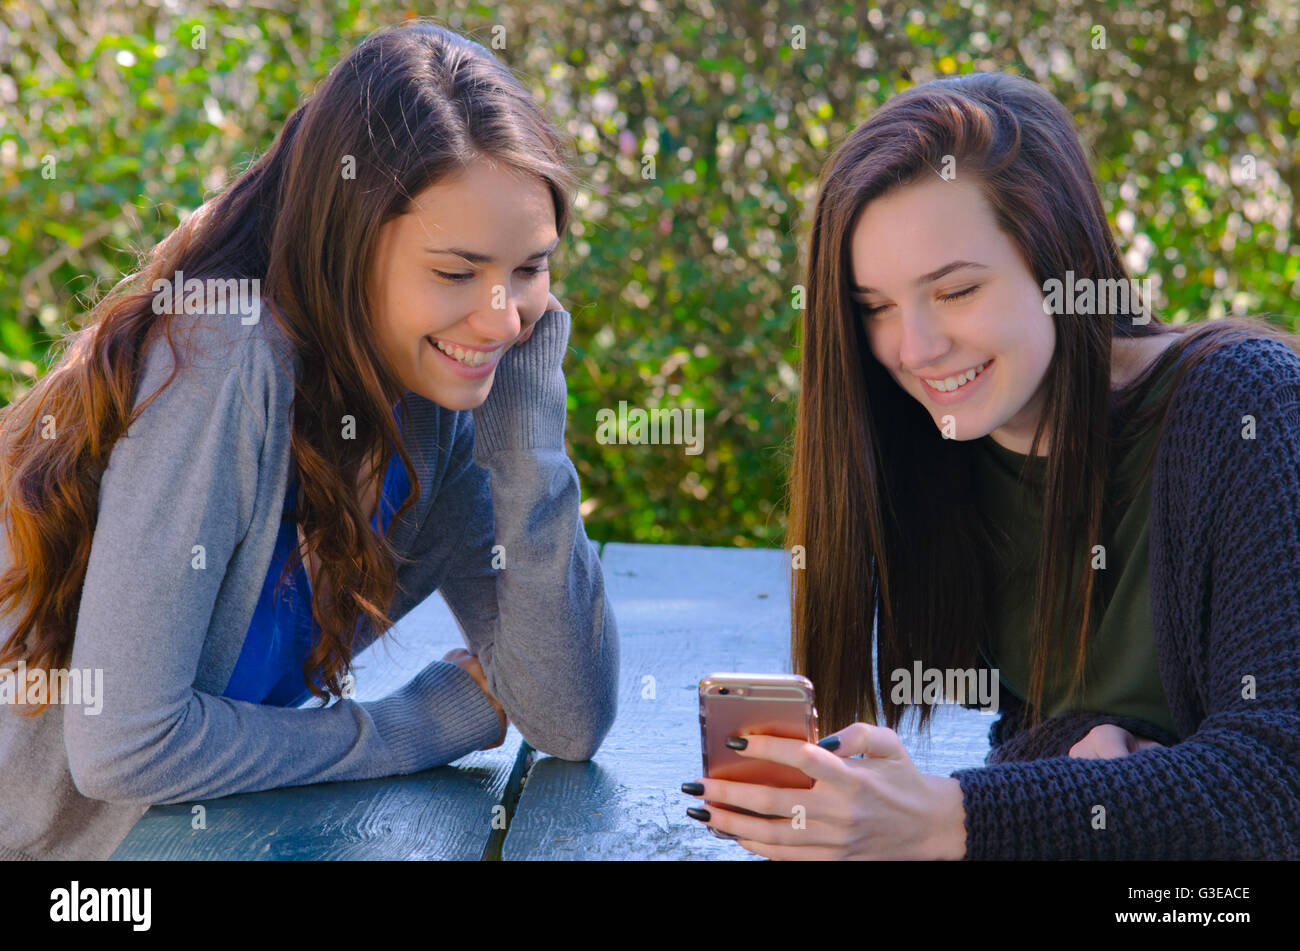 young smiling female brunette students talking at table with a cell phone outside Stock Photo